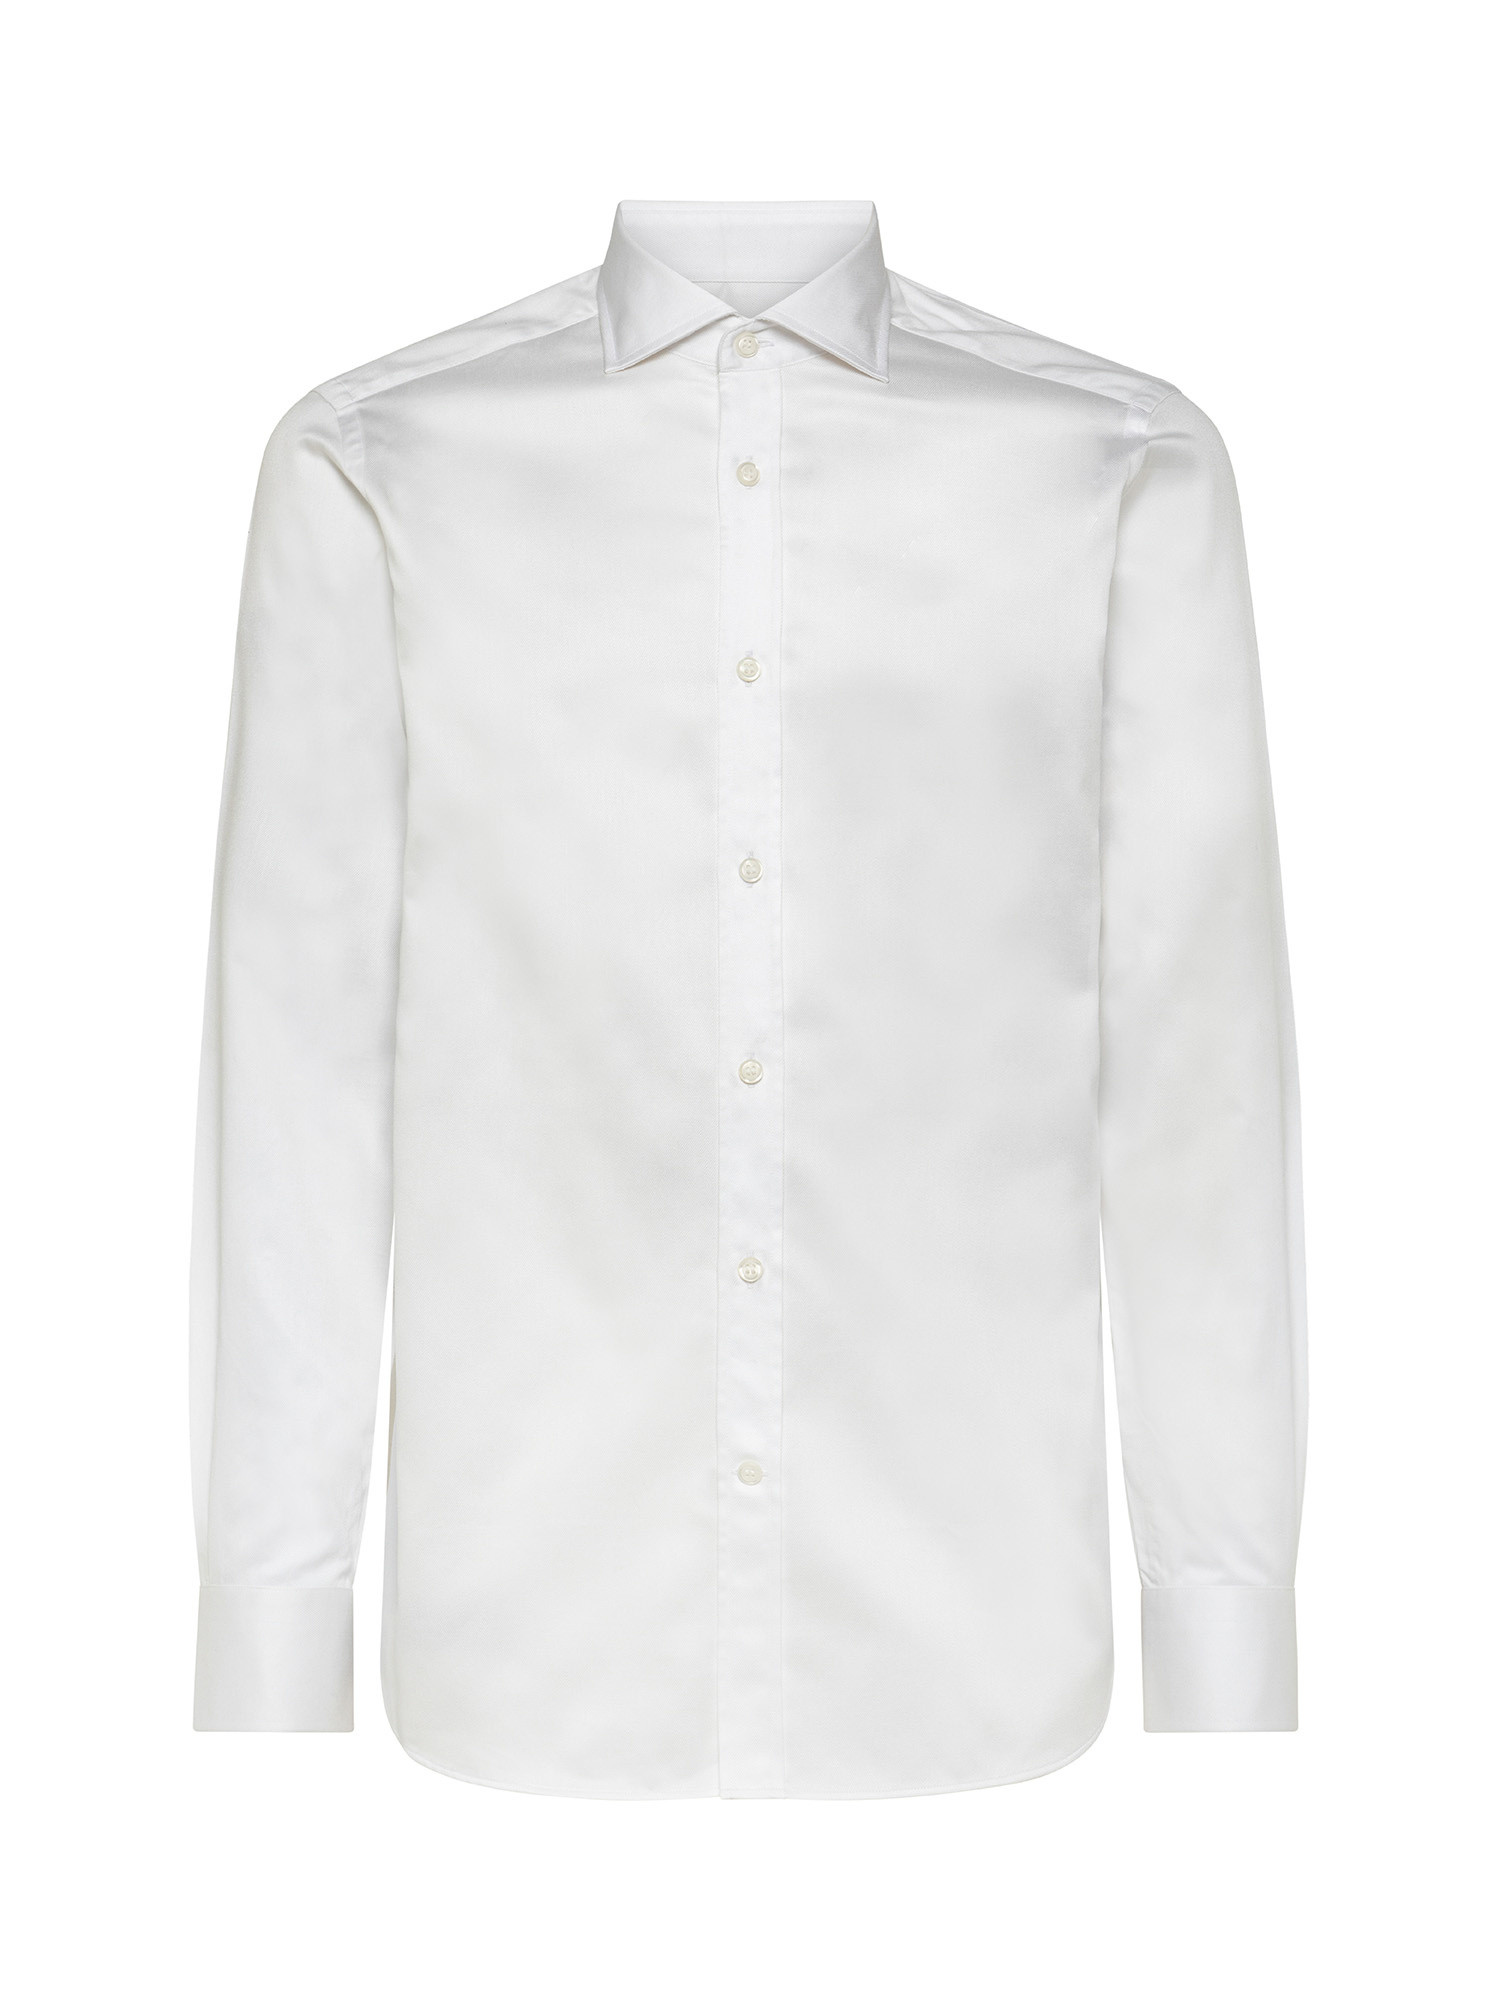 Slim fit shirt in pure cotton, White, large image number 1